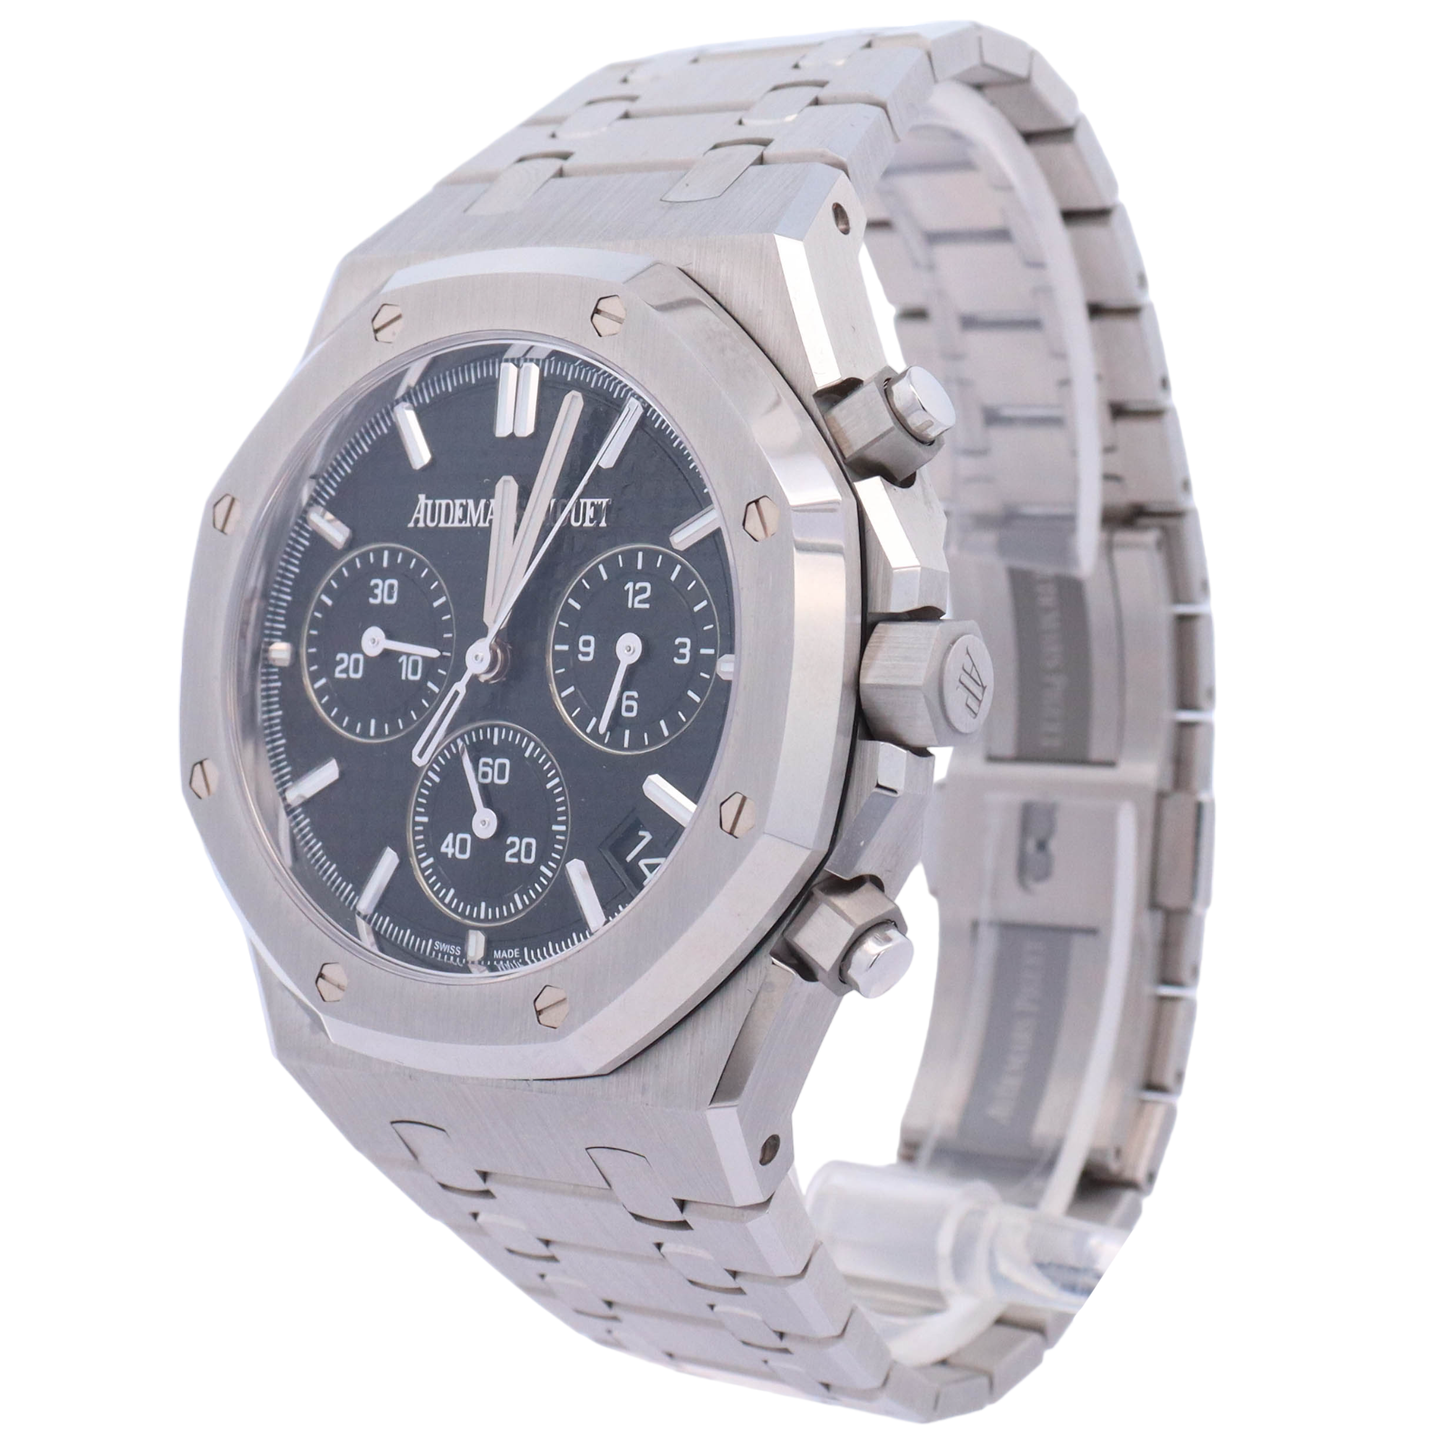 Audemars Piguet Royal Oak 41mm Stainless Steel Black Chronograph Dial Watch Reference# 26240ST.OO.1320ST.06 - Happy Jewelers Fine Jewelry Lifetime Warranty